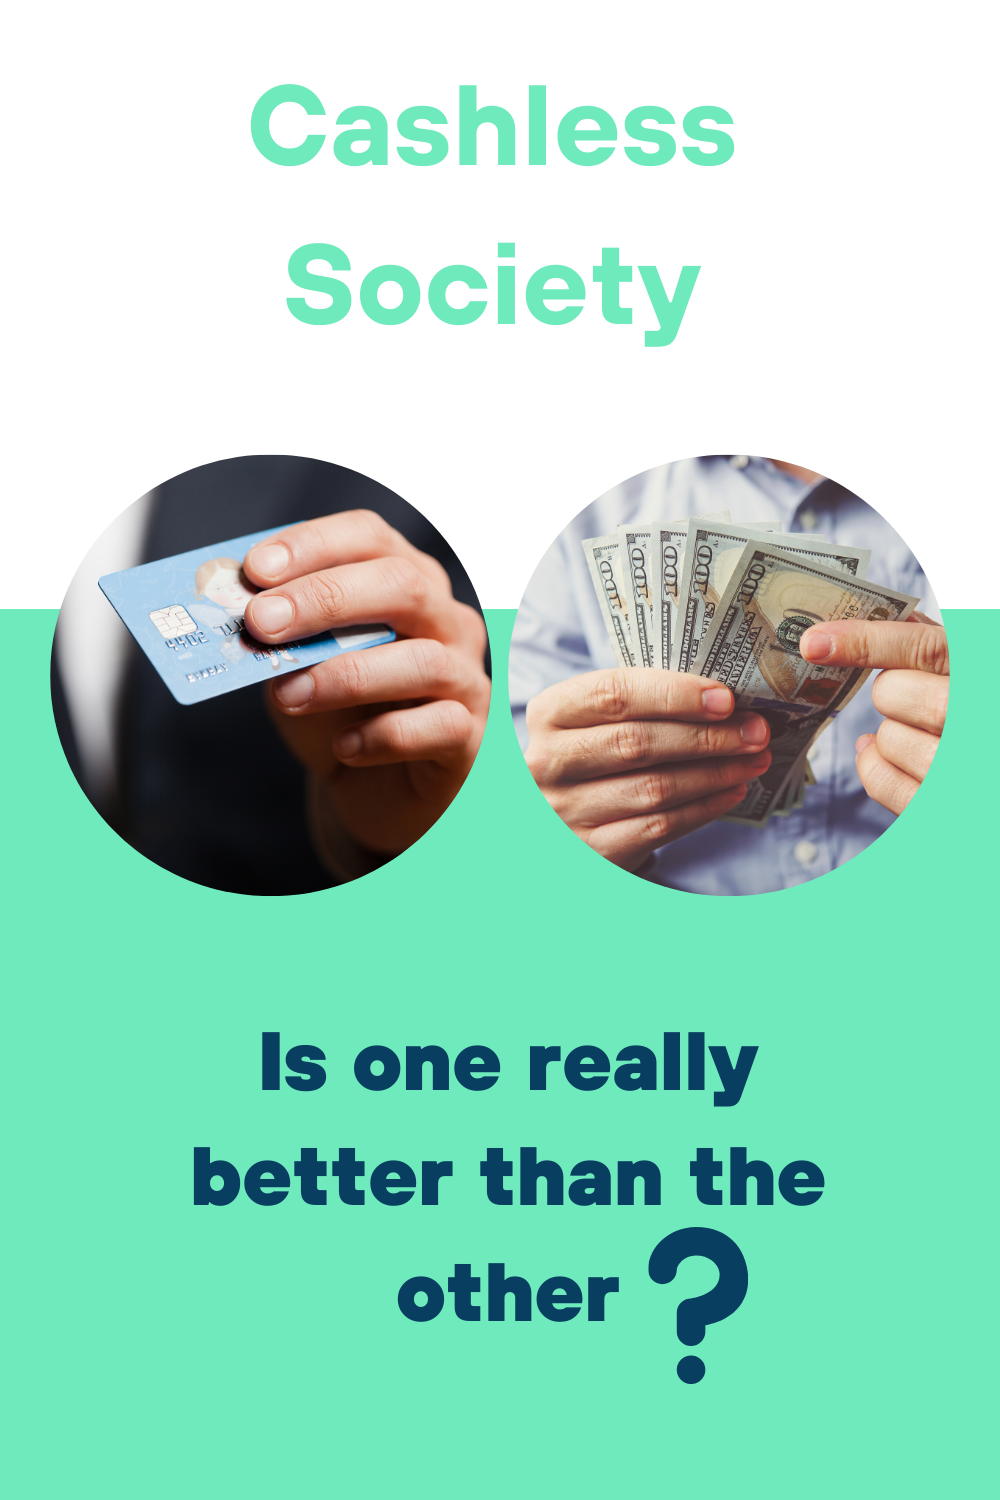 Are You Ready For a Cashless Society? Here Are the Pros & Cons! The